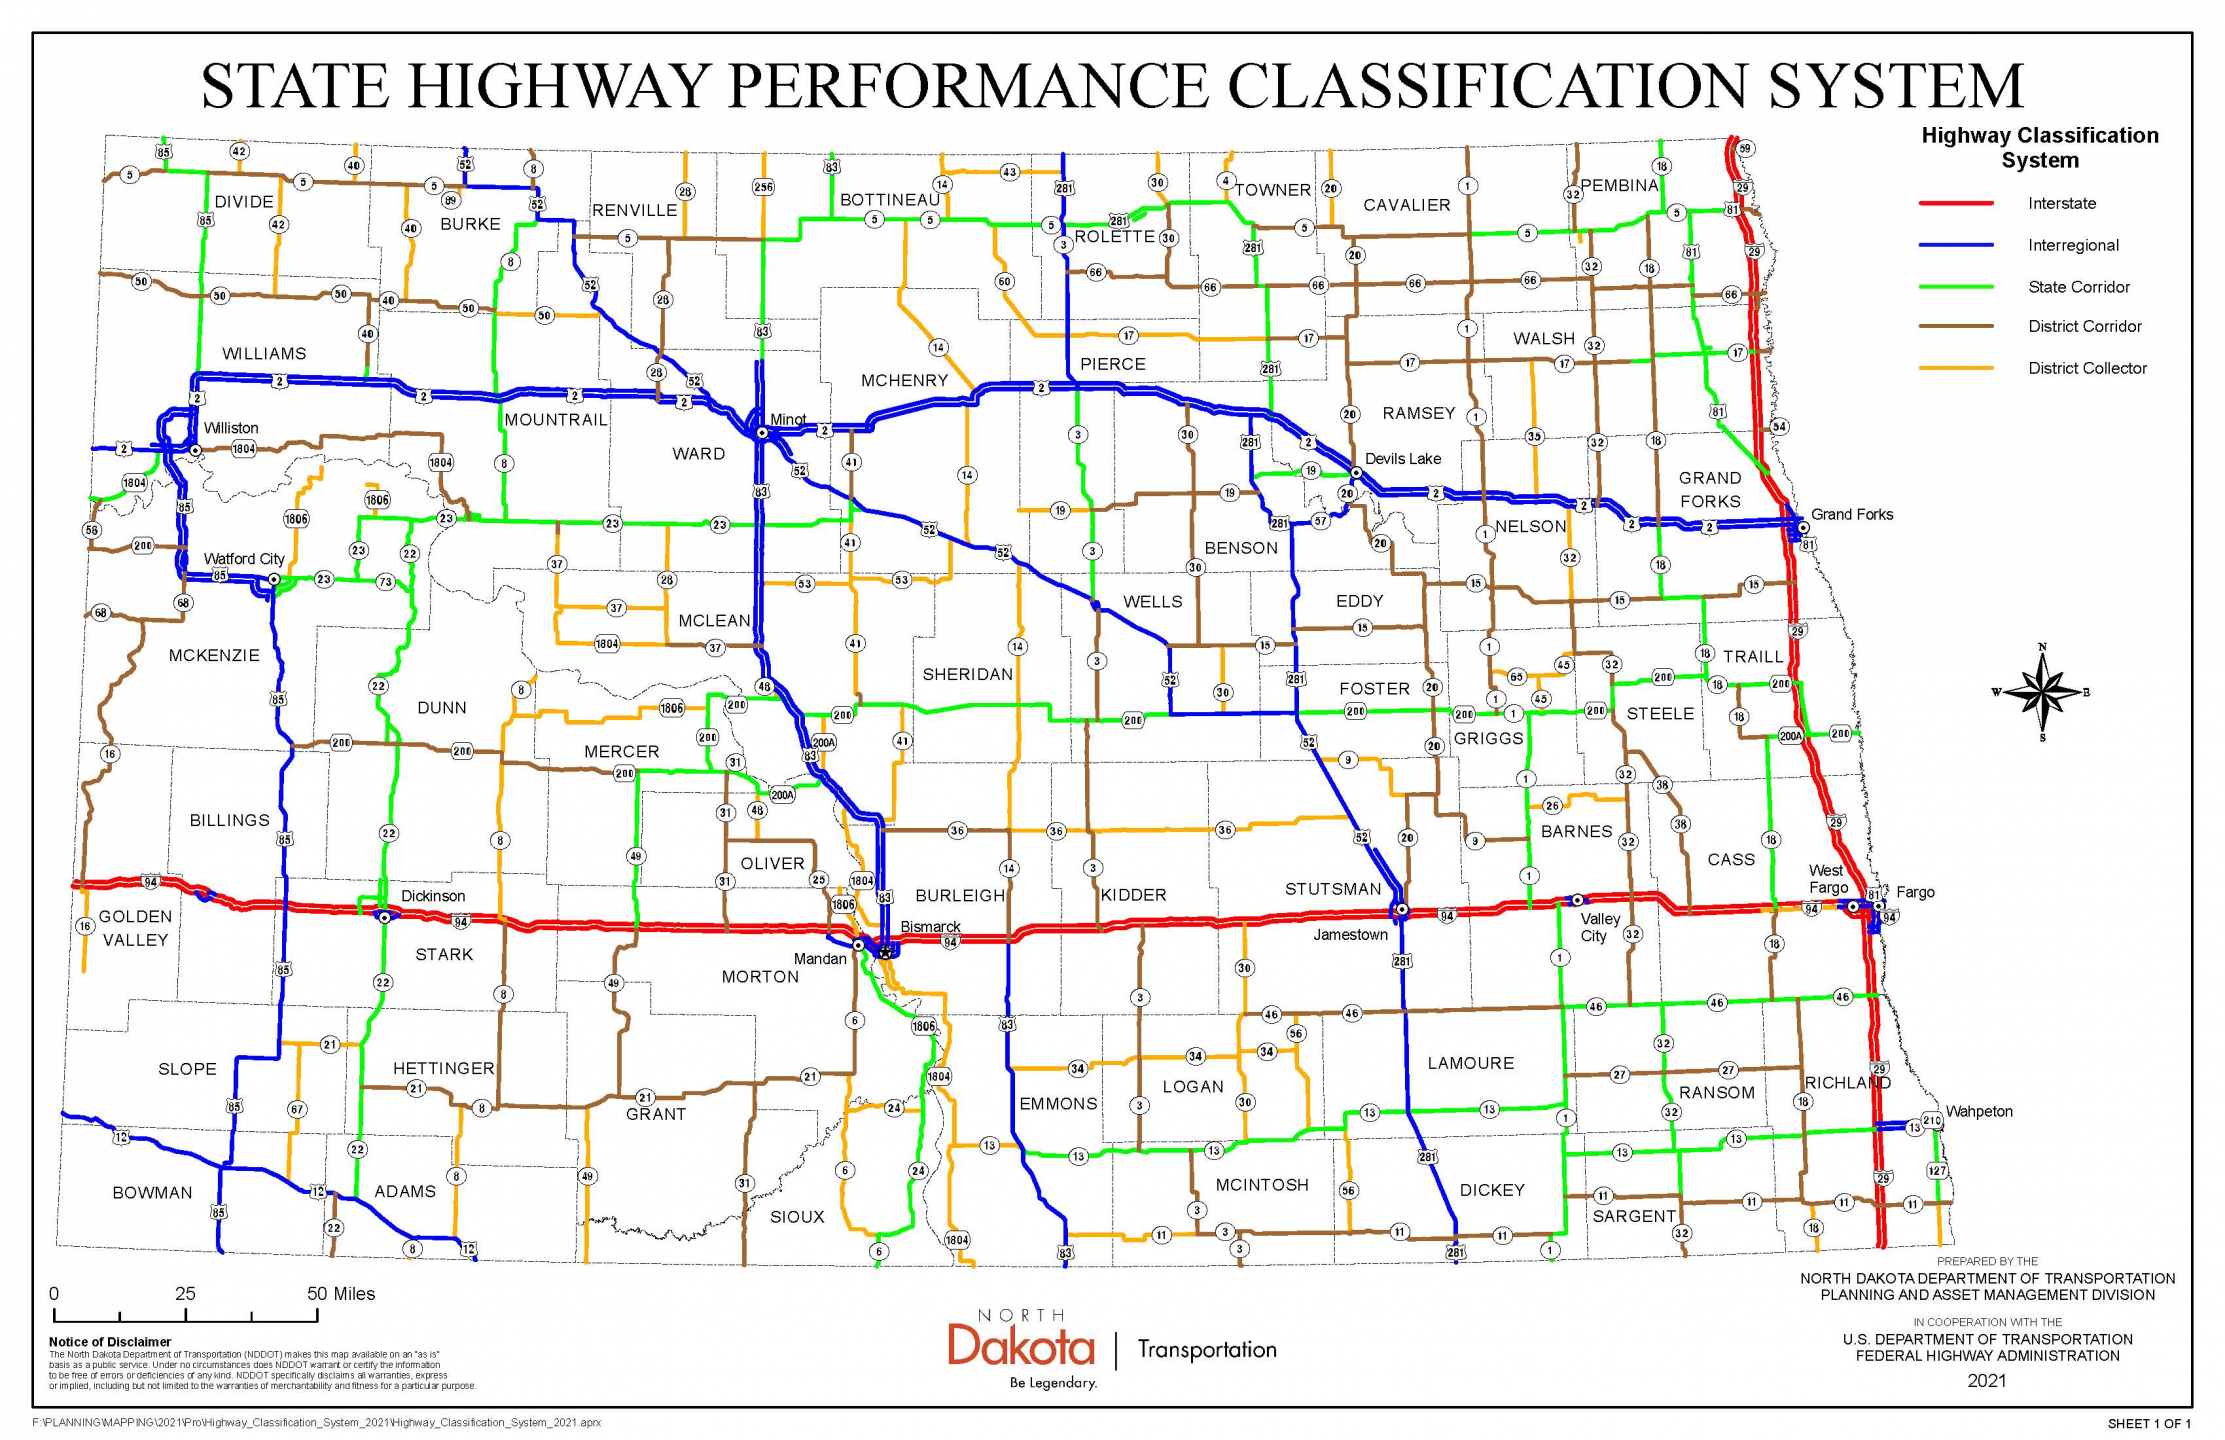 State Highway Performance Classification System map